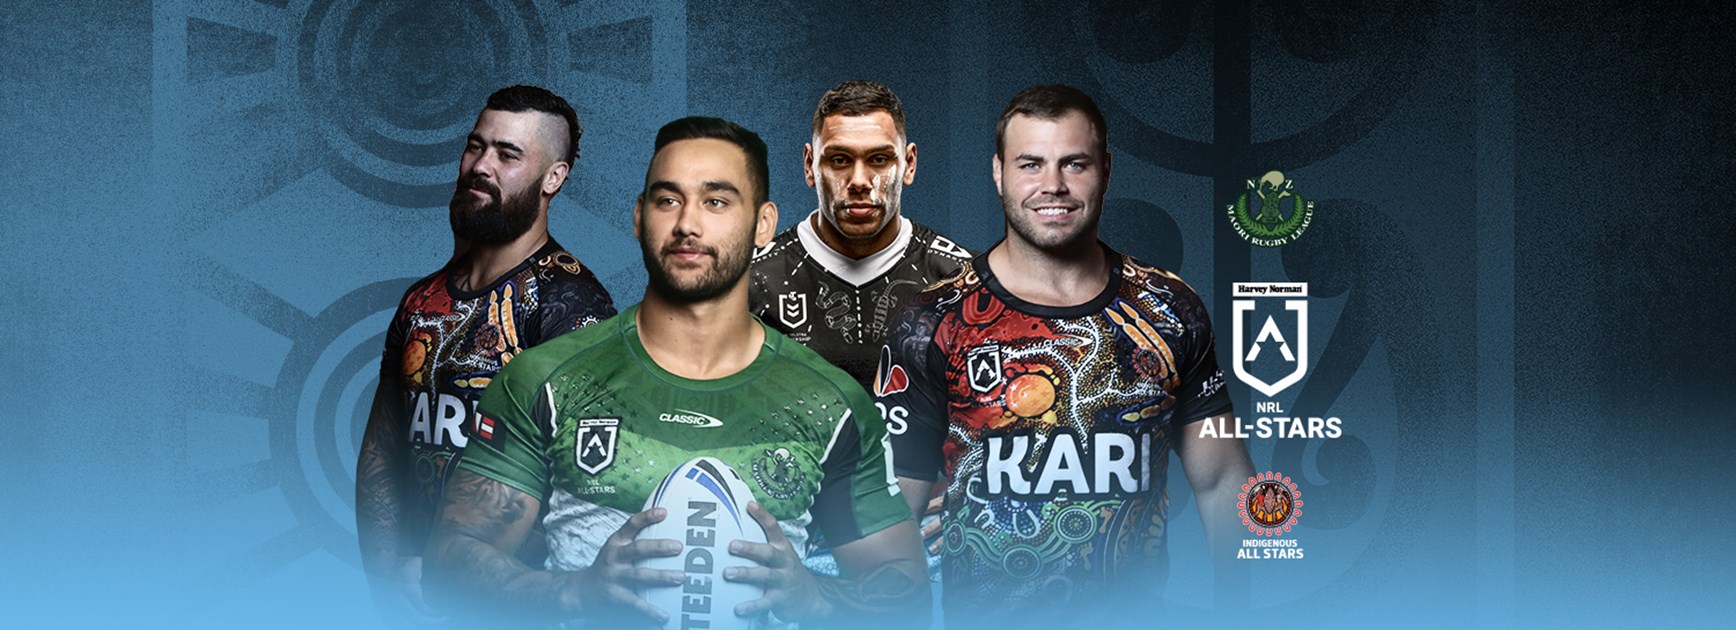 Four Sharks selected for All Stars